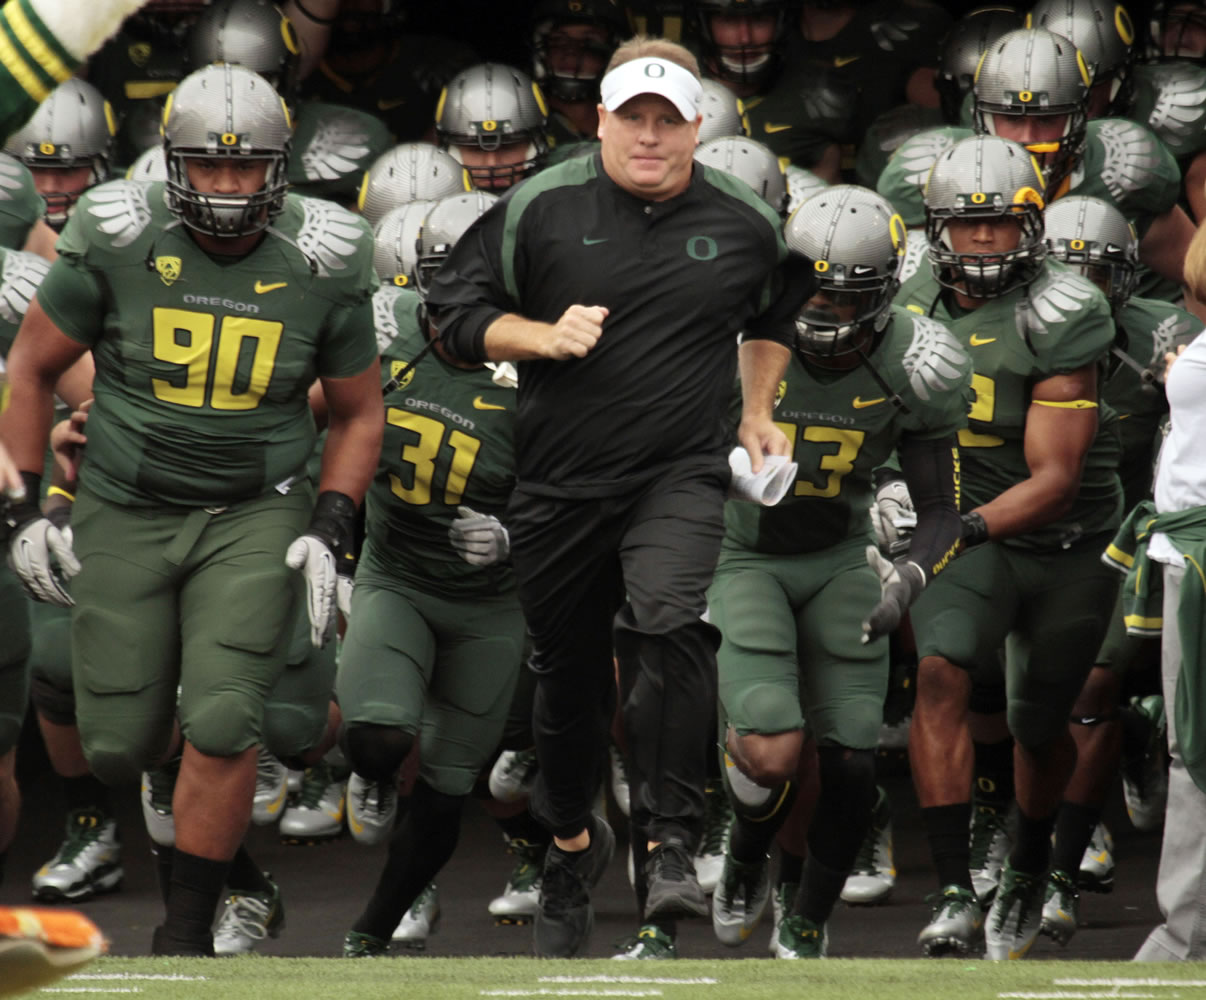 The NCAA's Division I Infractions Committee released a report on Wednesday that found former Oregon football coach Chip Kelly and the university failed to monitor the program.